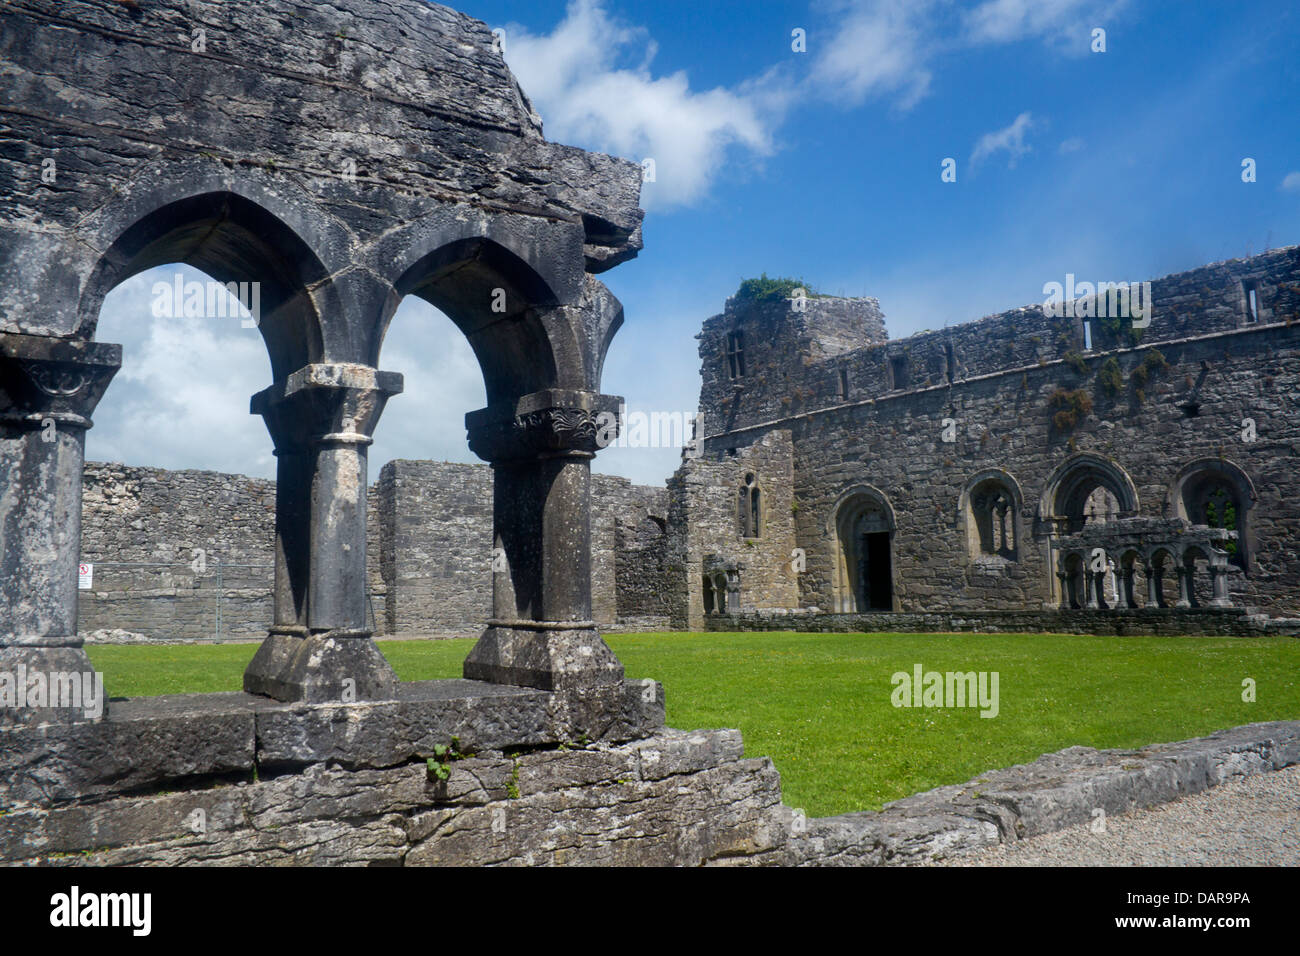 Cong Abbey Cloister and church Cong Co County Mayo Eire Republic of Ireland Stock Photo